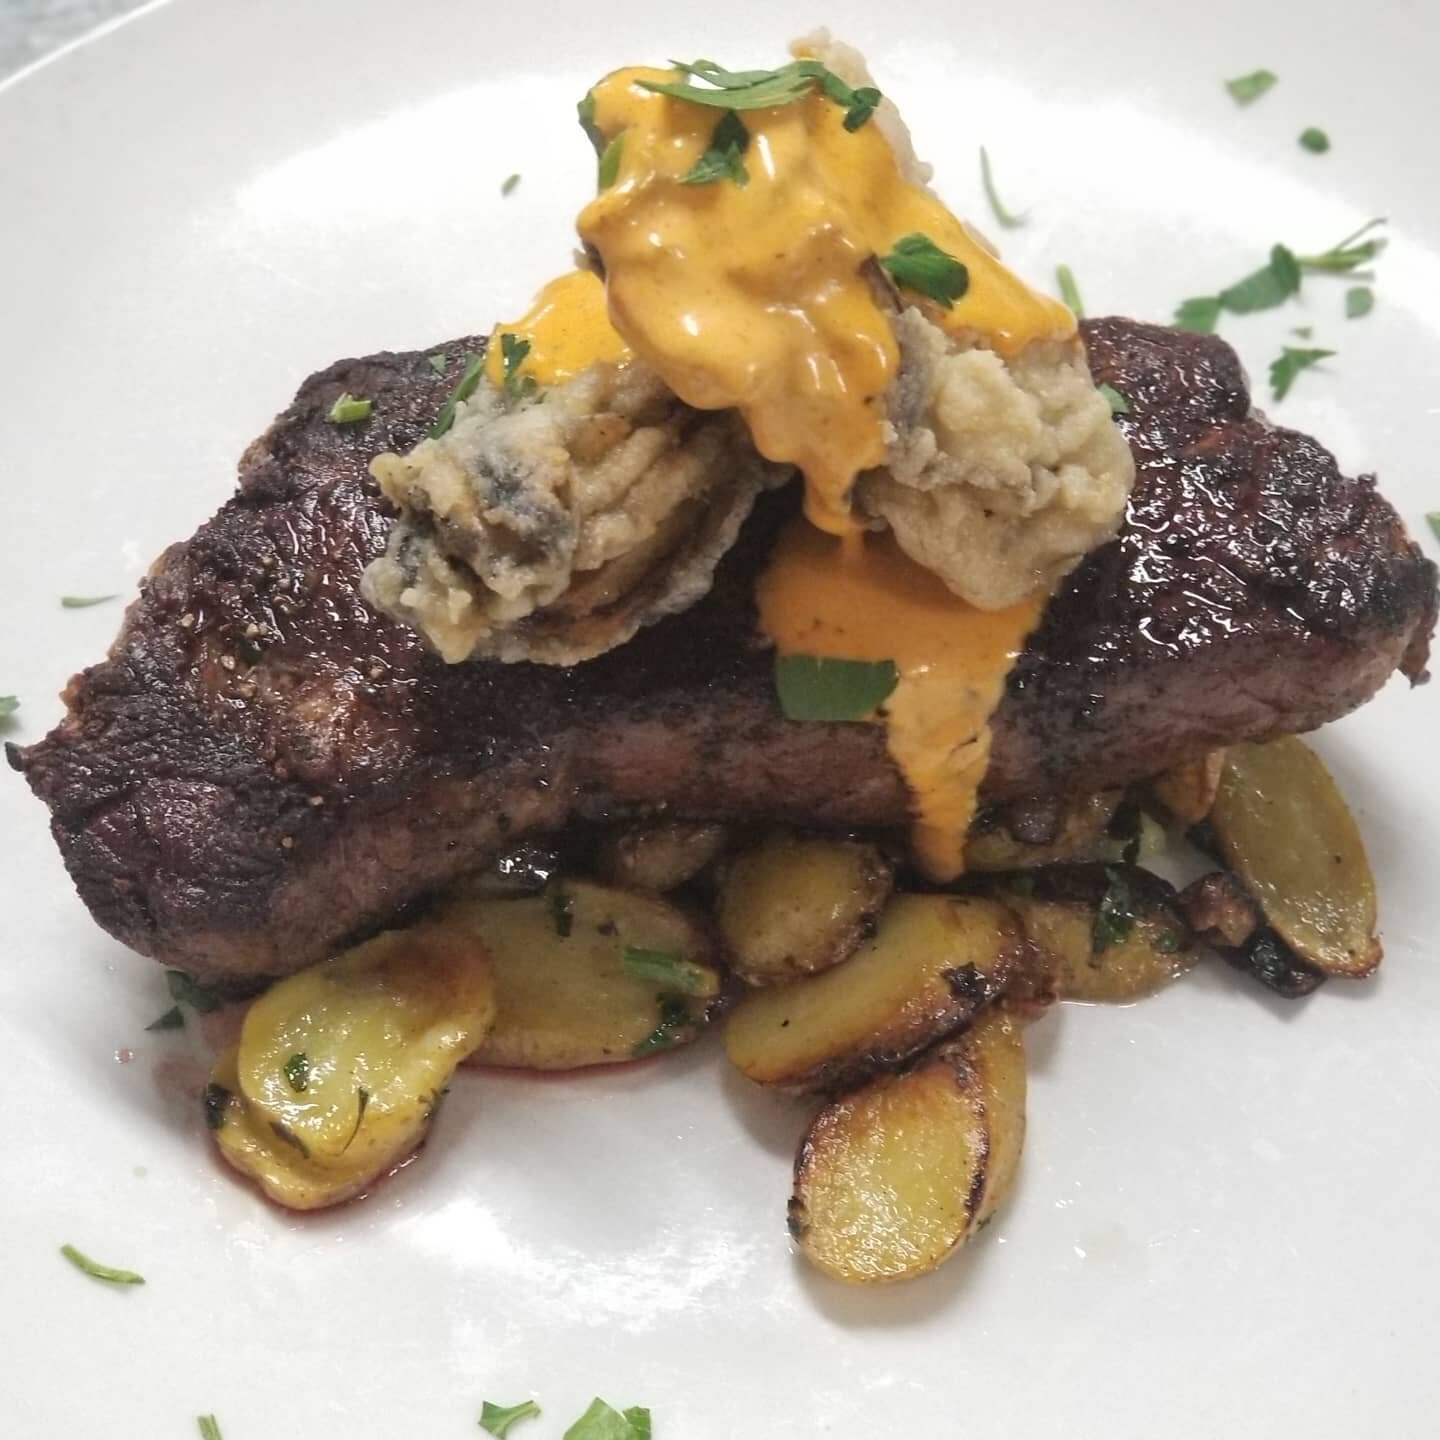 New York Strip + Netarts Bay Oysters on the specials board tonight!  #pearlpointoysters #eatlocal #supportlocal #teamschooner